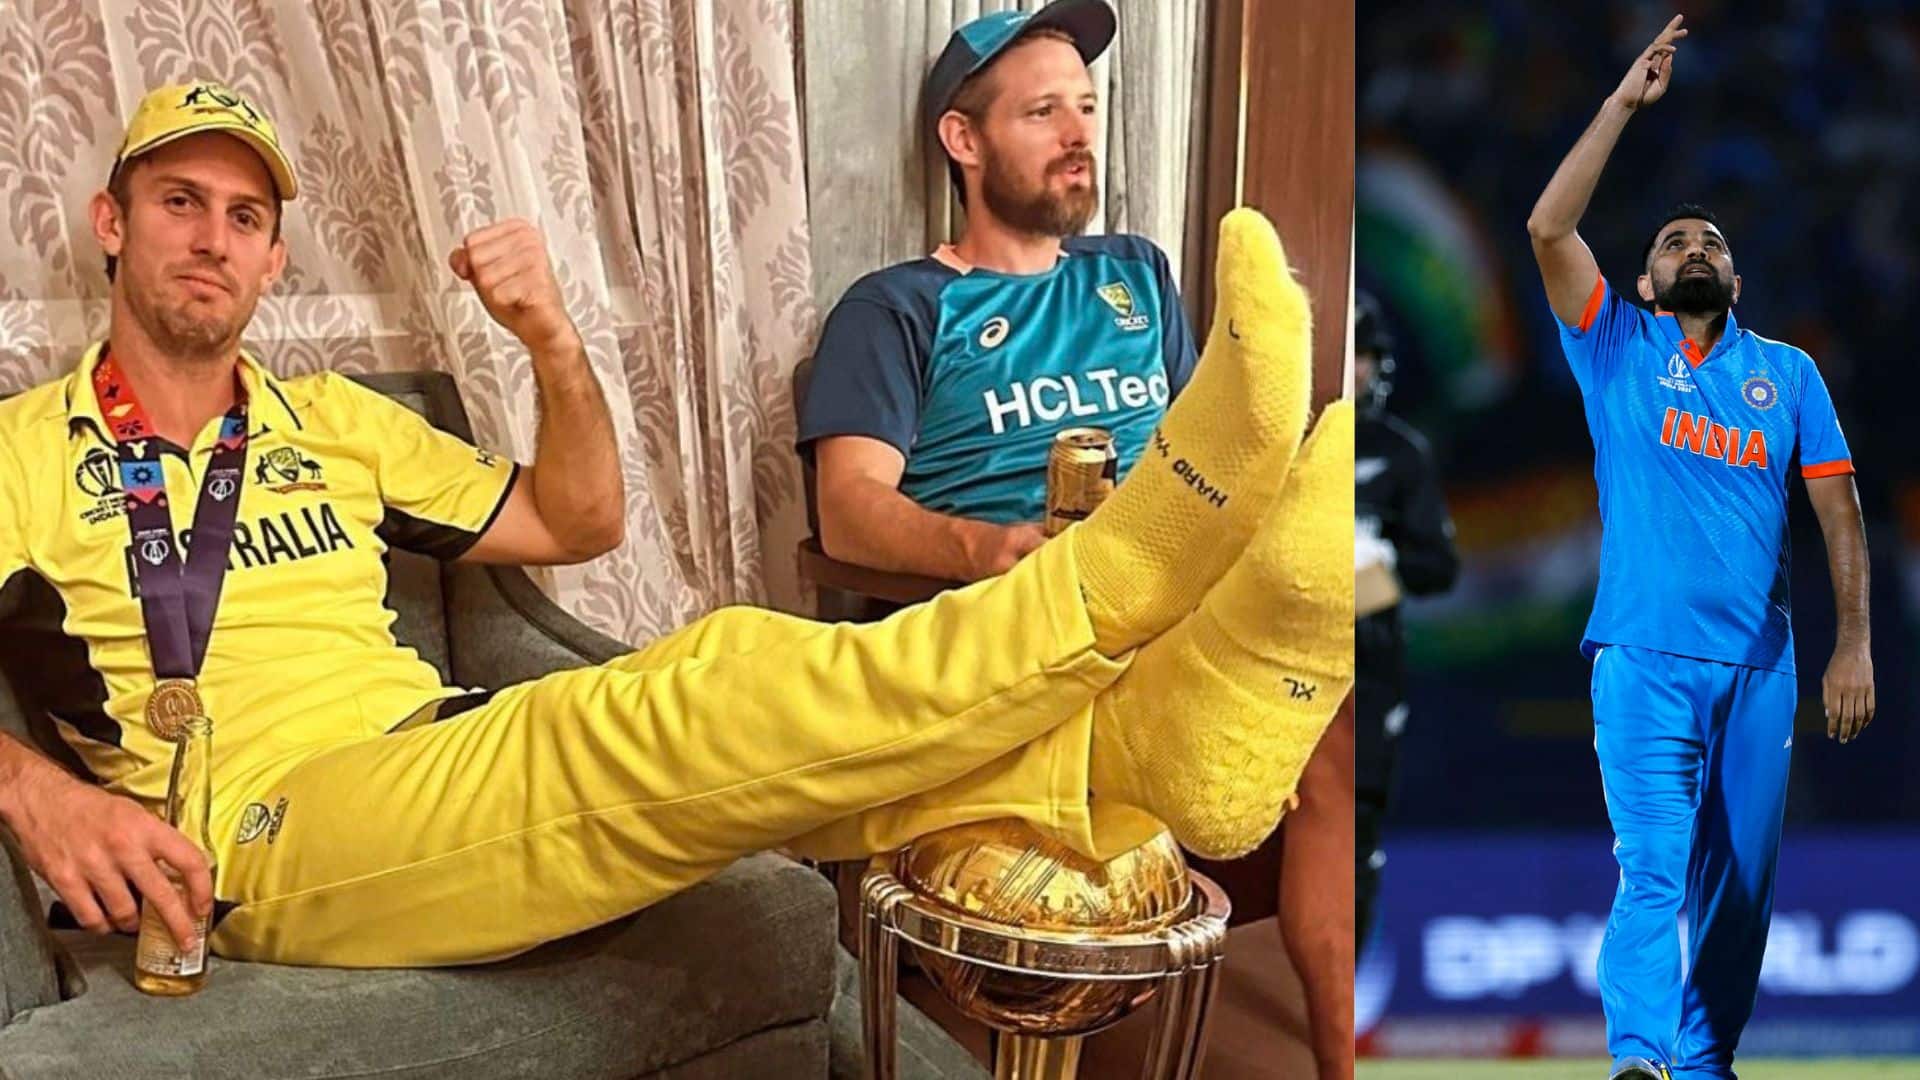 'Trophy For Which..': 'Hurt' Shami Condemns Mitchell Marsh's Feet On Trophy Gesture